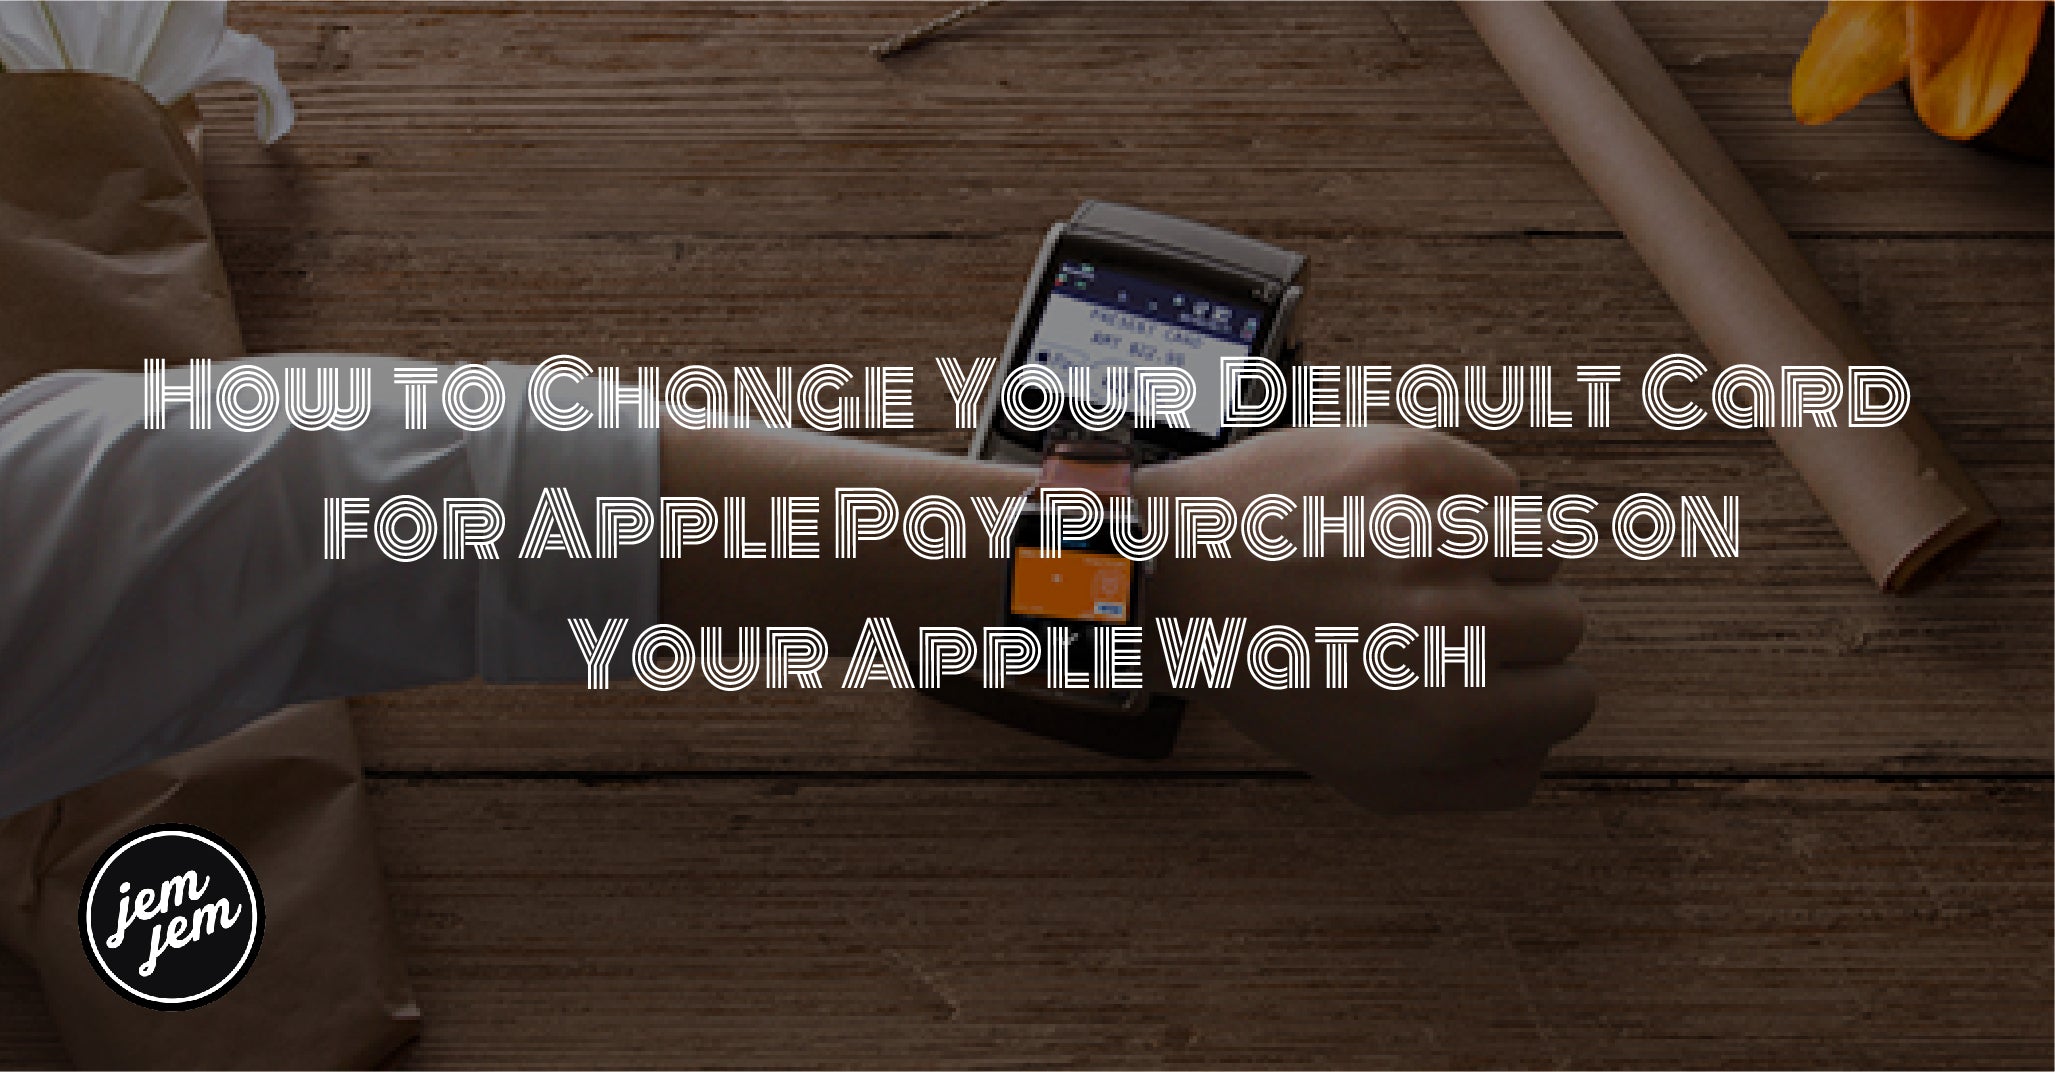 How to Change Your Default Card for Apple Pay Purchases on Your Apple Watch